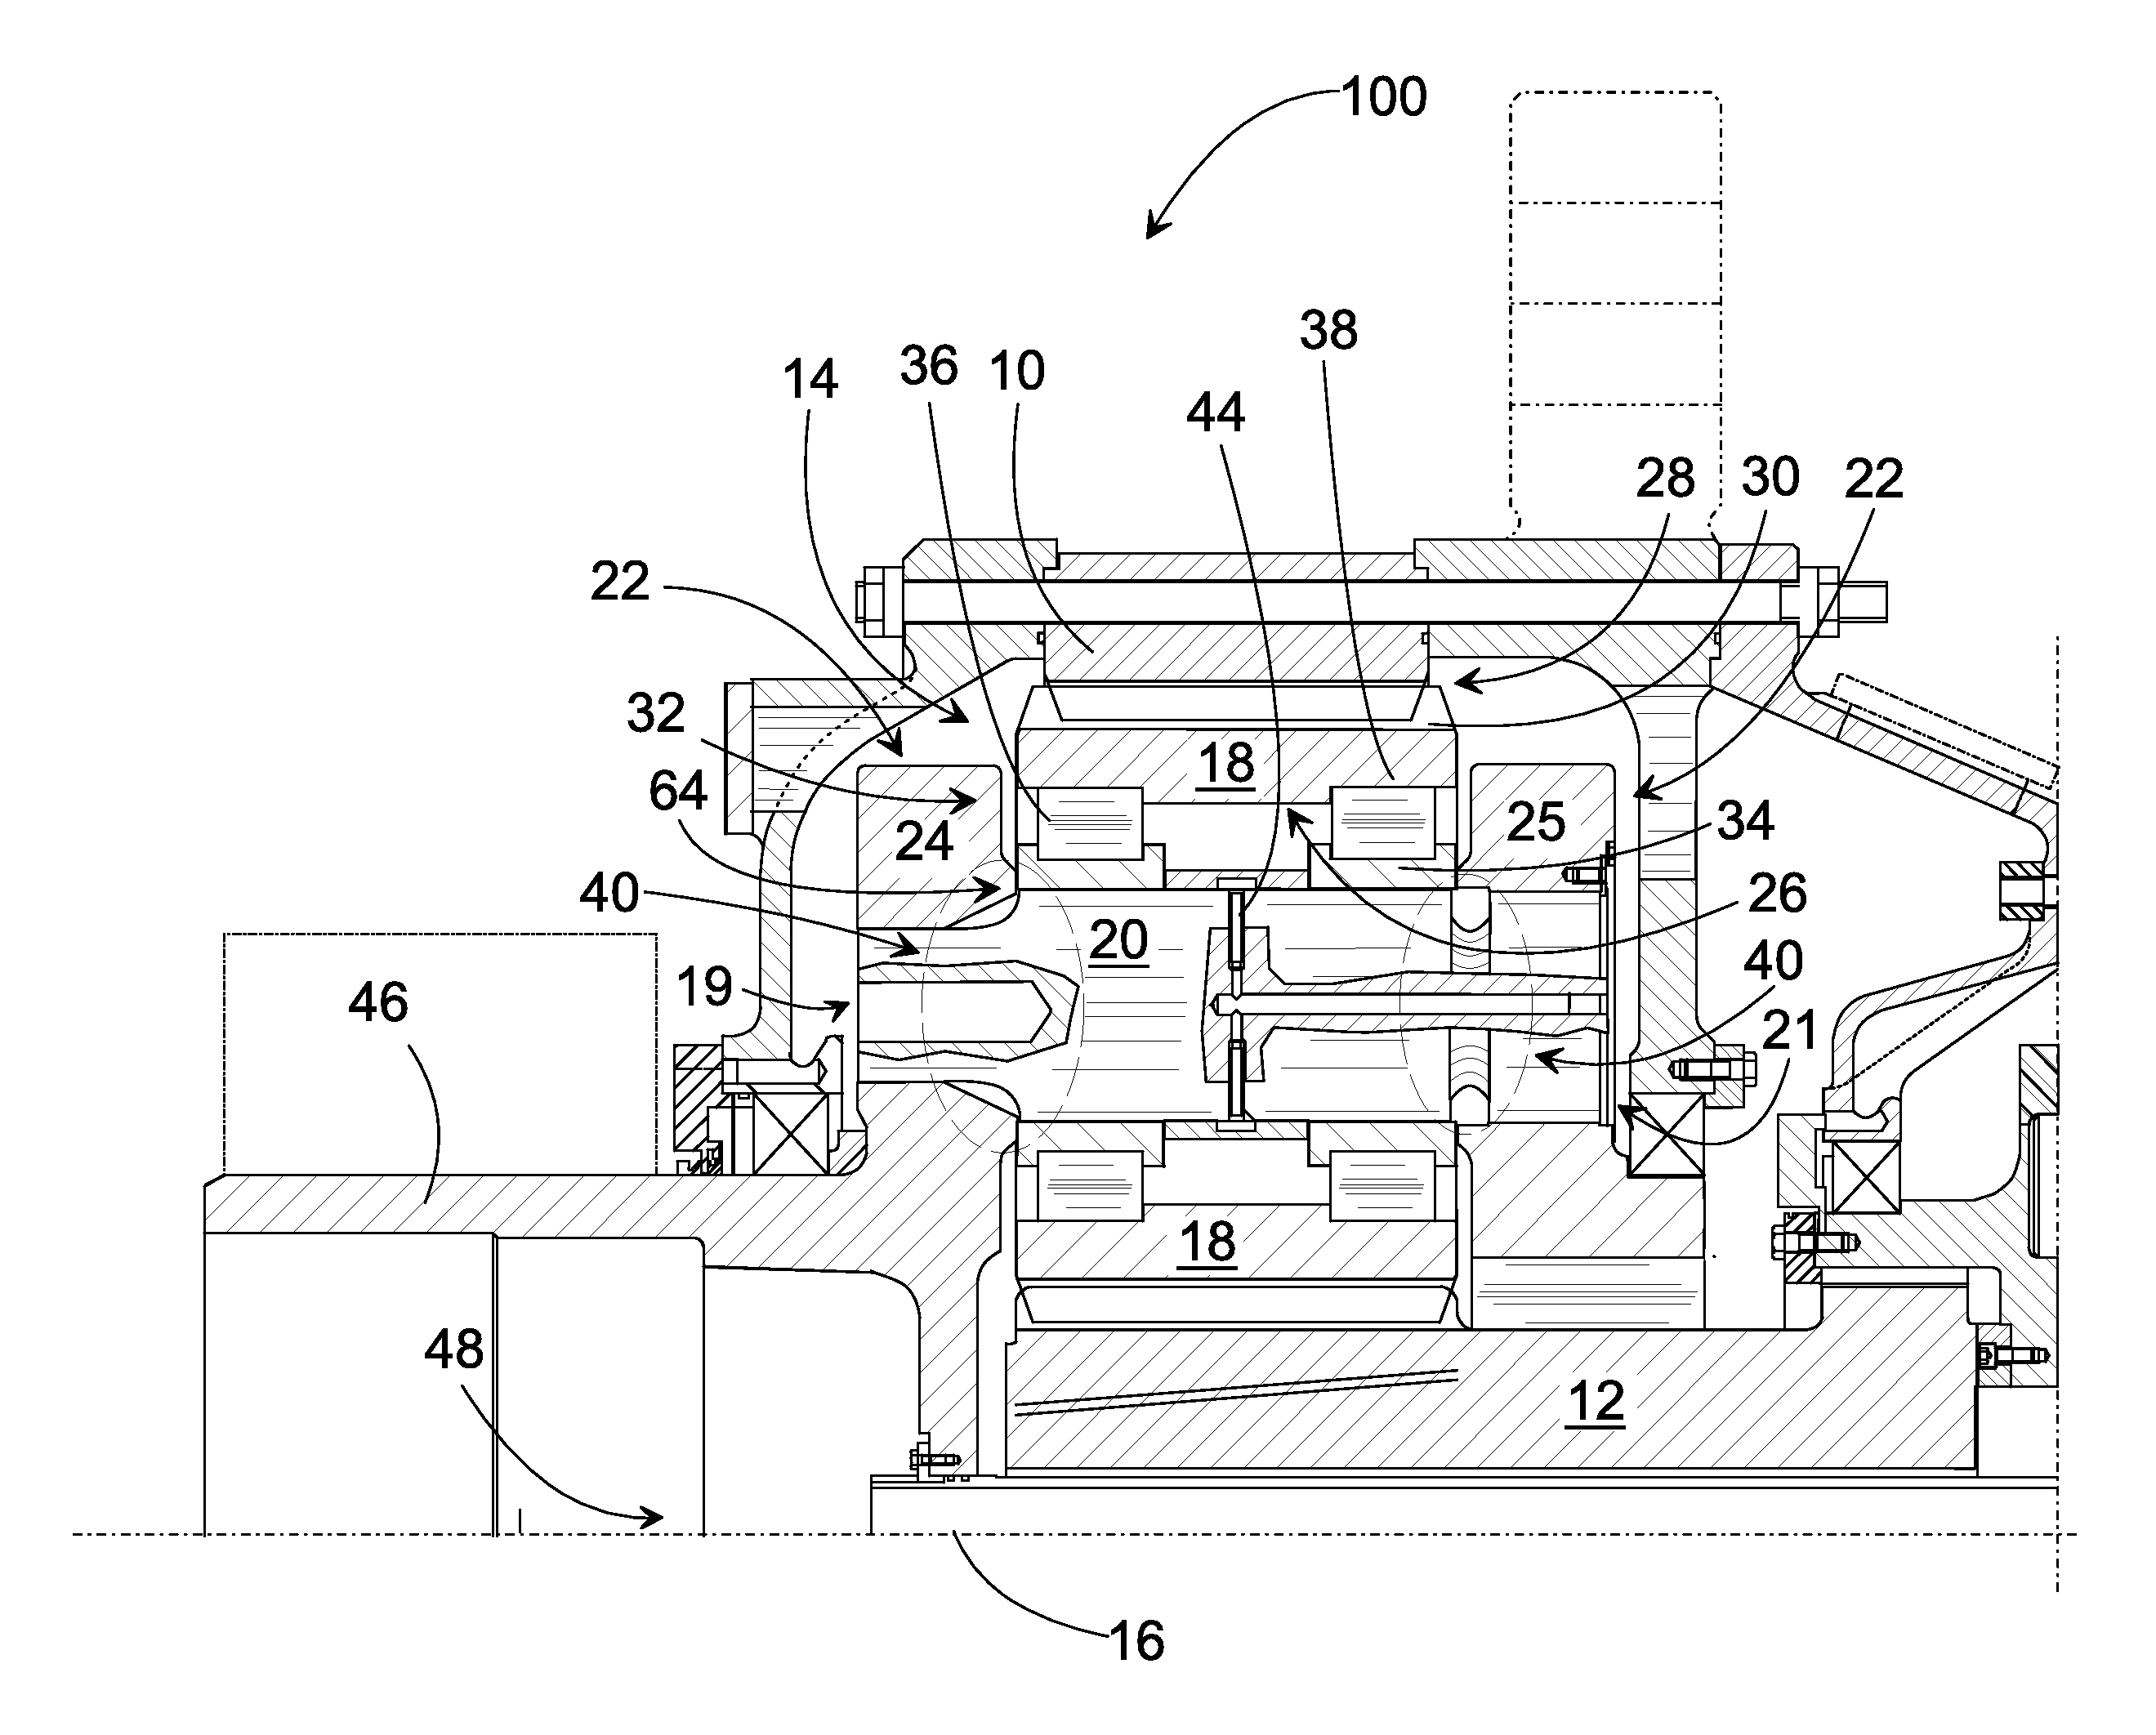 Arrangement in a Planetary Gearing and a Planetary Gear